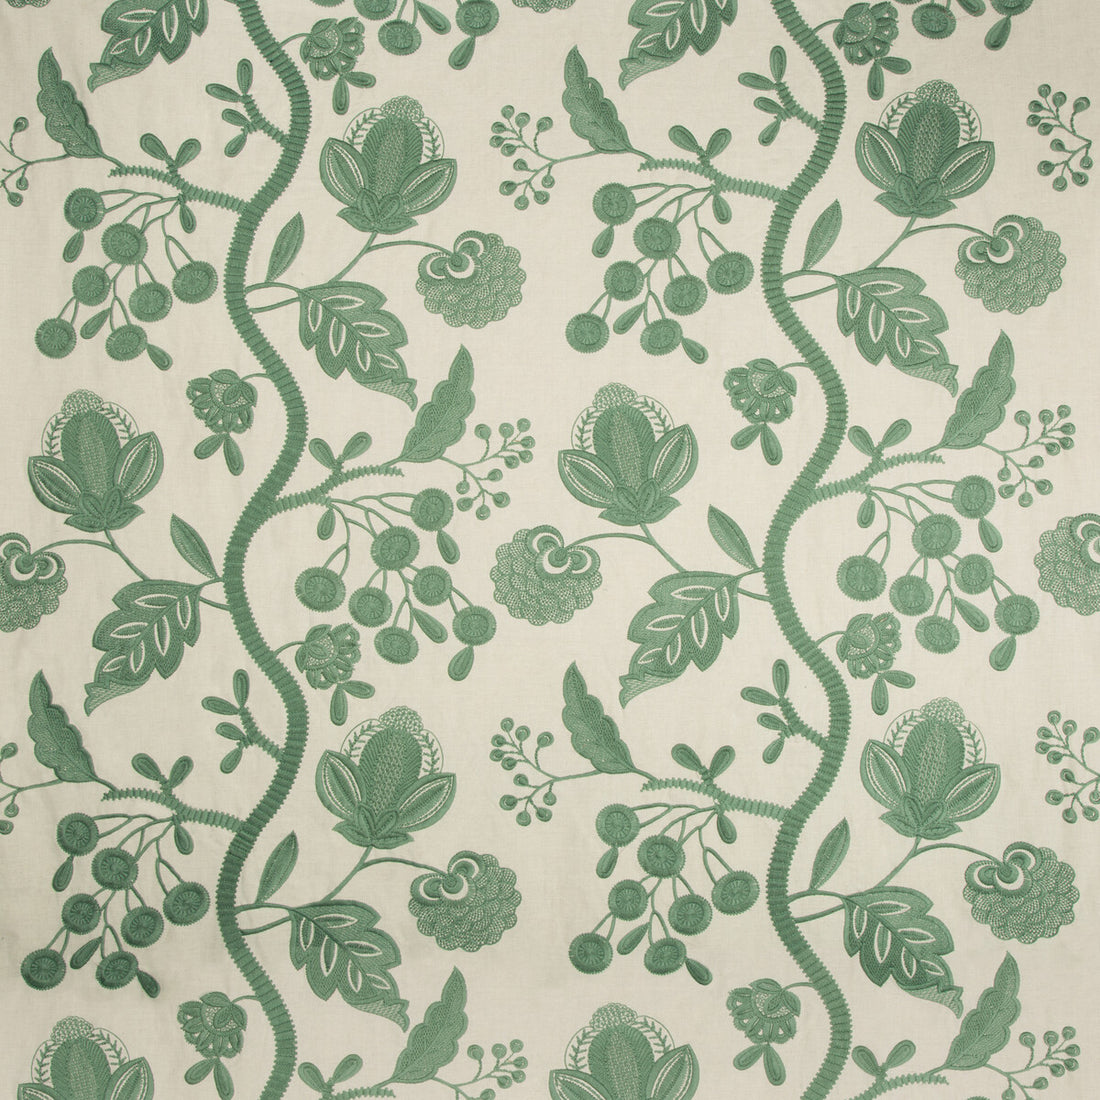 Alladale Emb fabric in jade color - pattern 2017131.23.0 - by Lee Jofa in the Lodge II Weaves And Embroideries collection